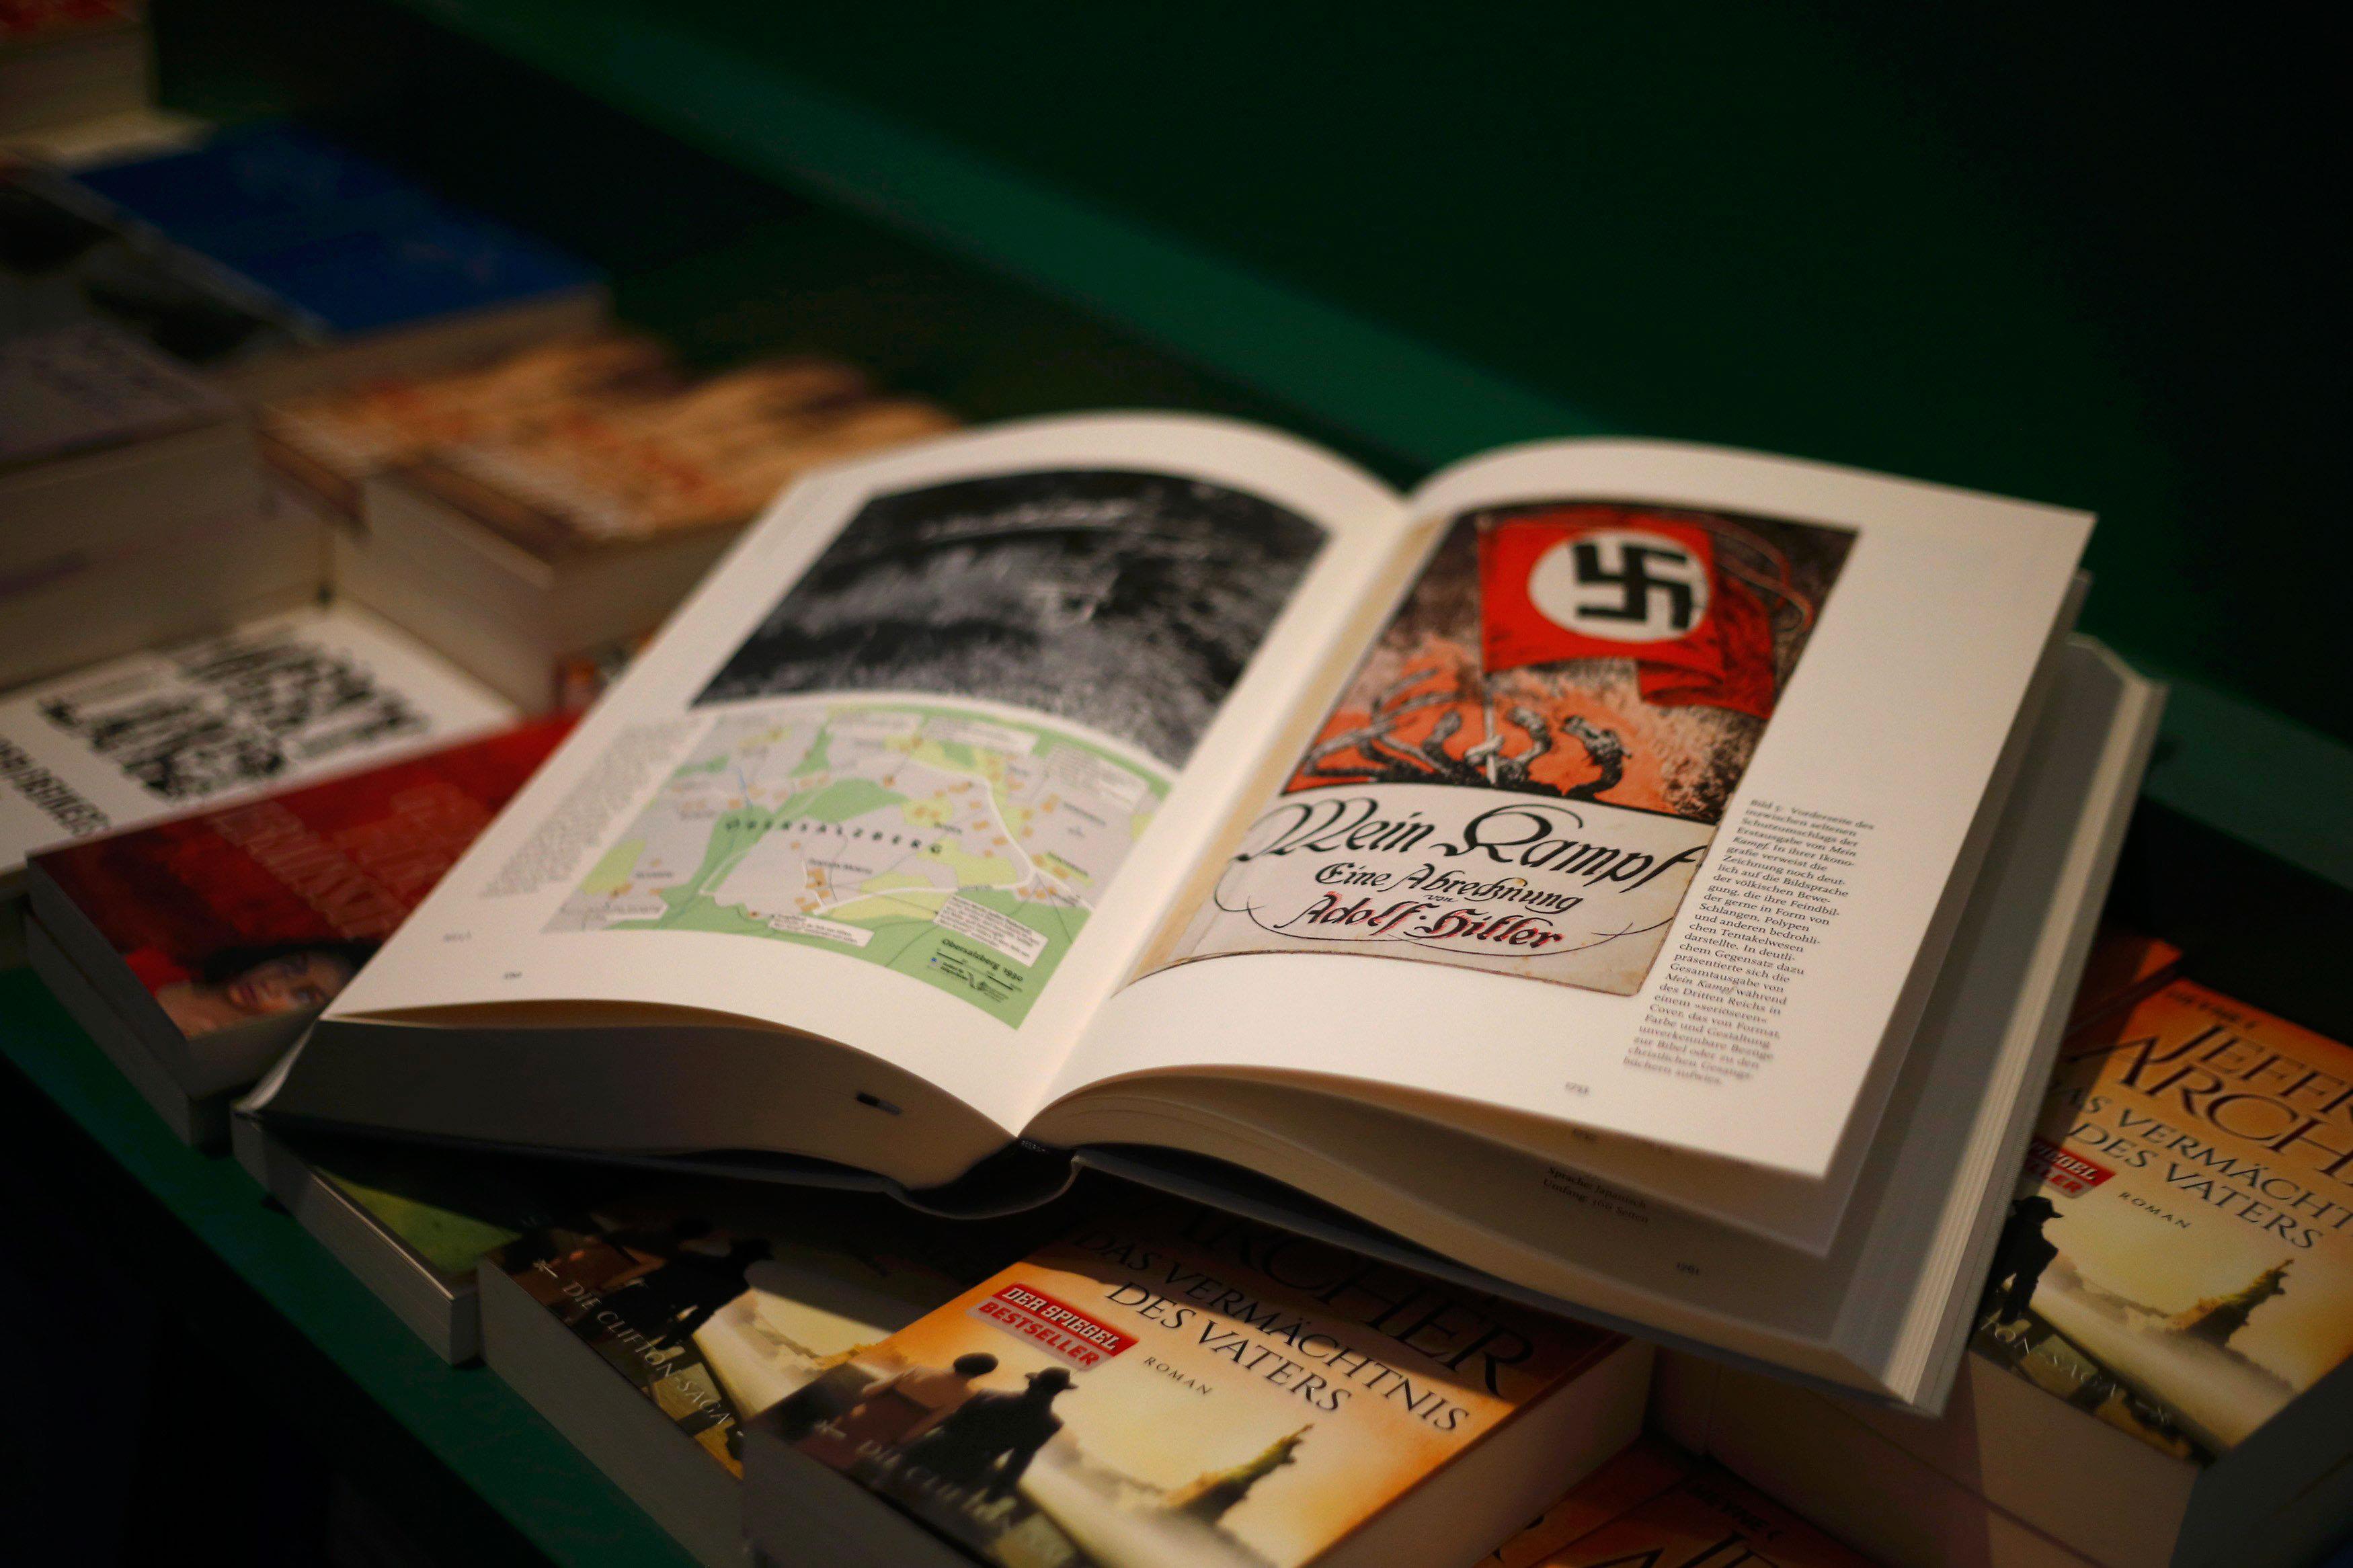 A copy of the book 'Hitler, Mein Kampf. A Critical Edition' lies on a display table in a bookshop in